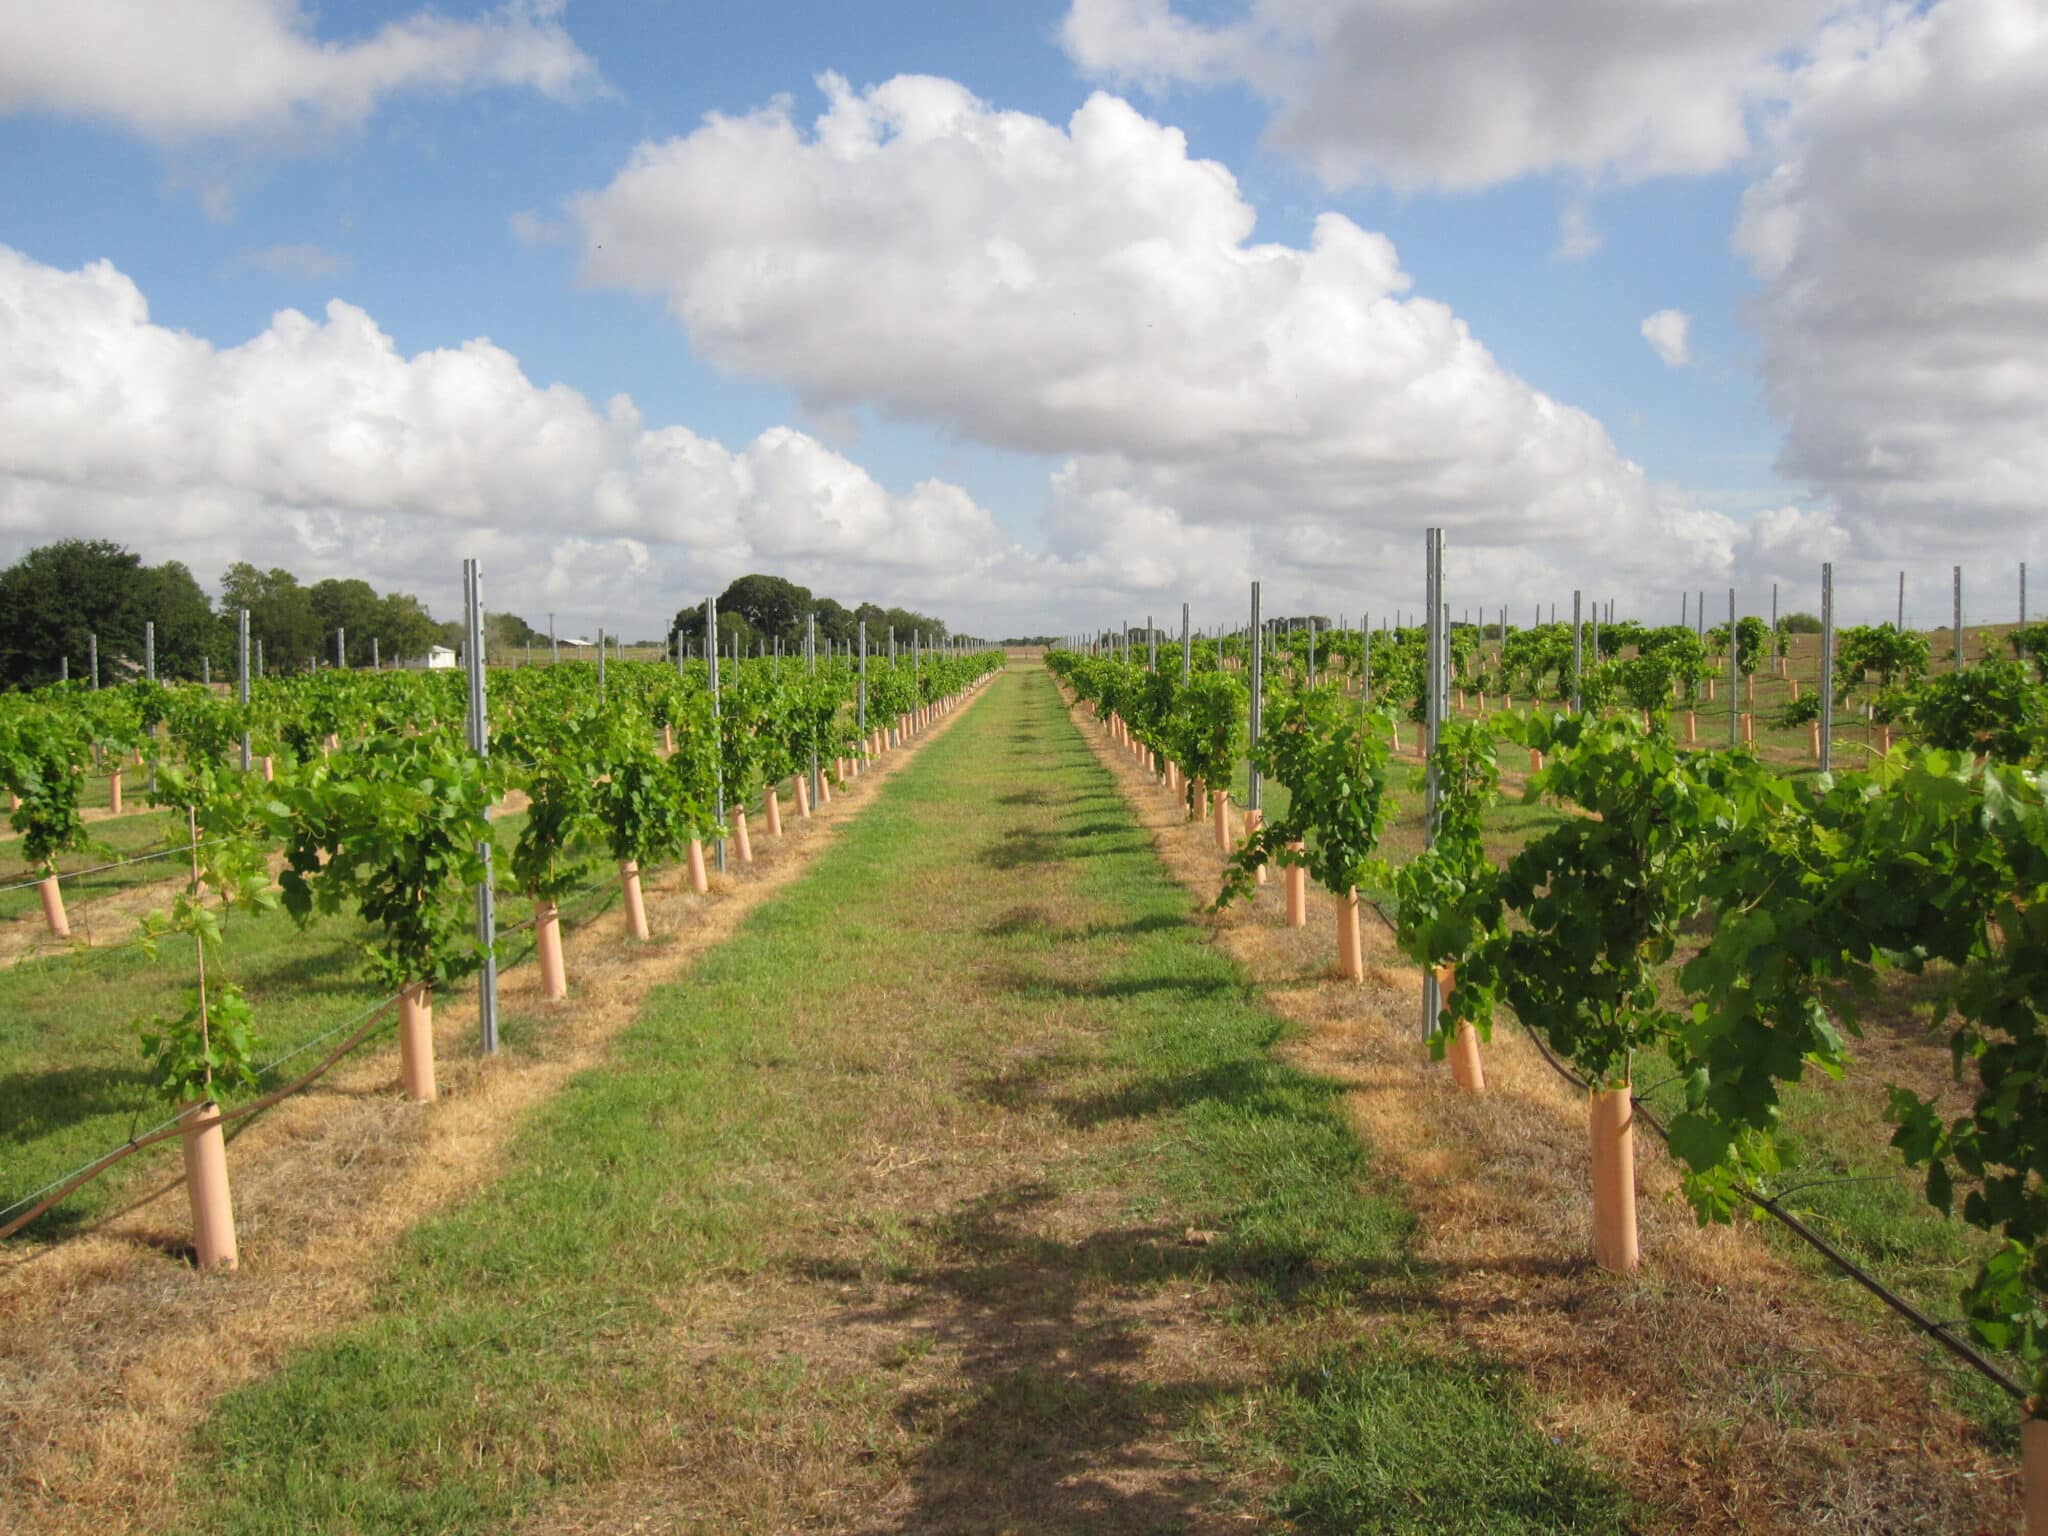 Test Course | Virtual Viticulture Academy